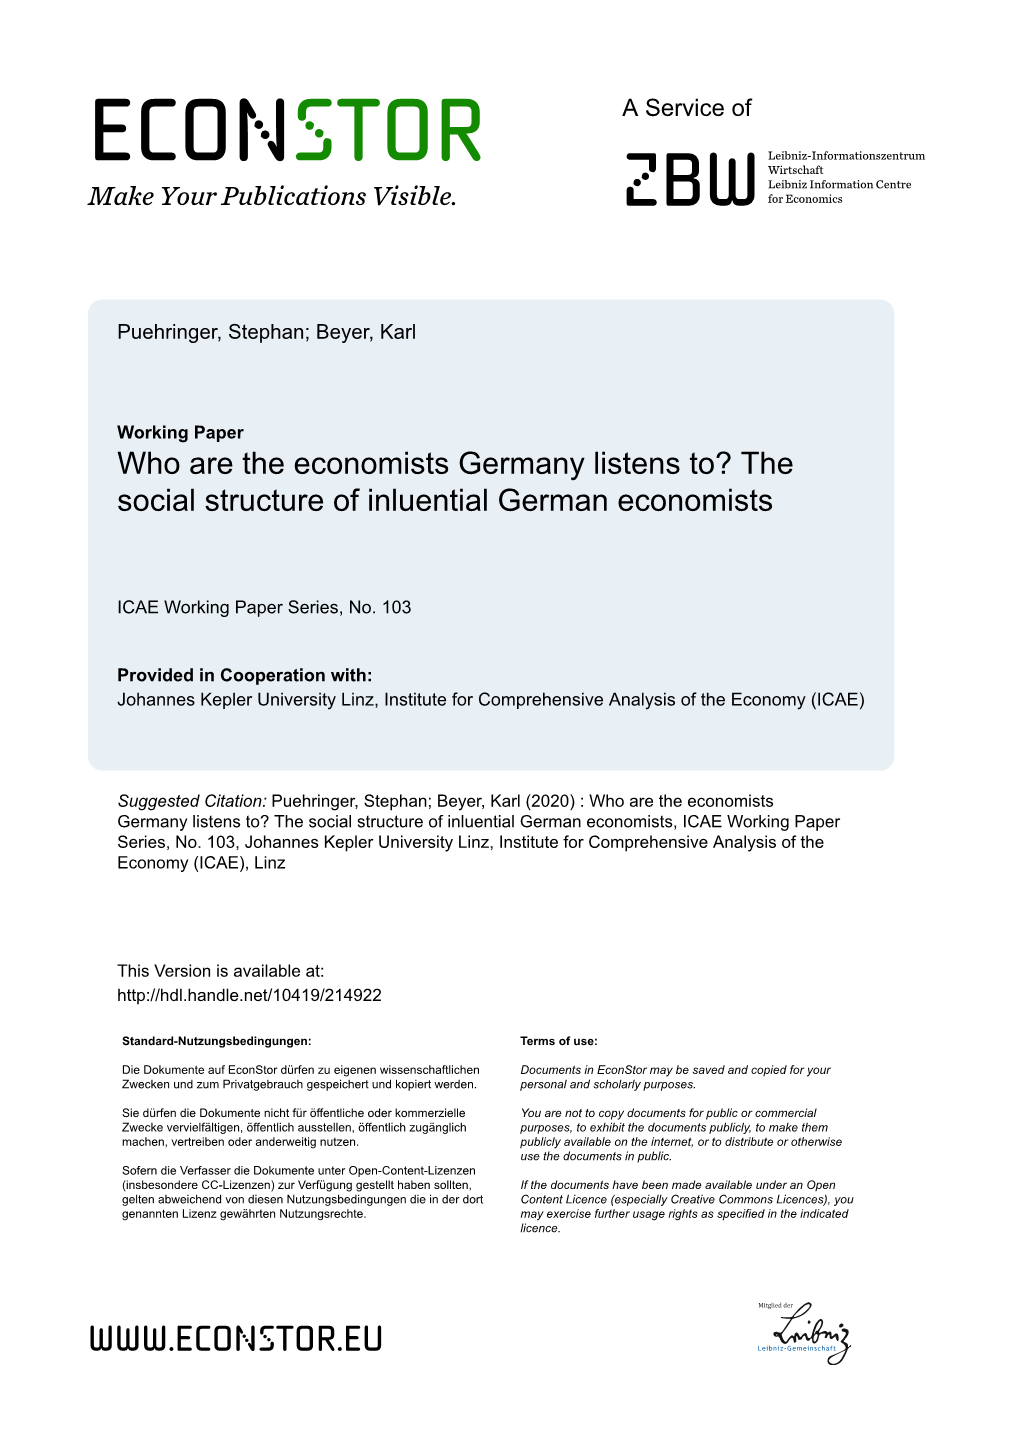 The Social Structure of Inluential German Economists